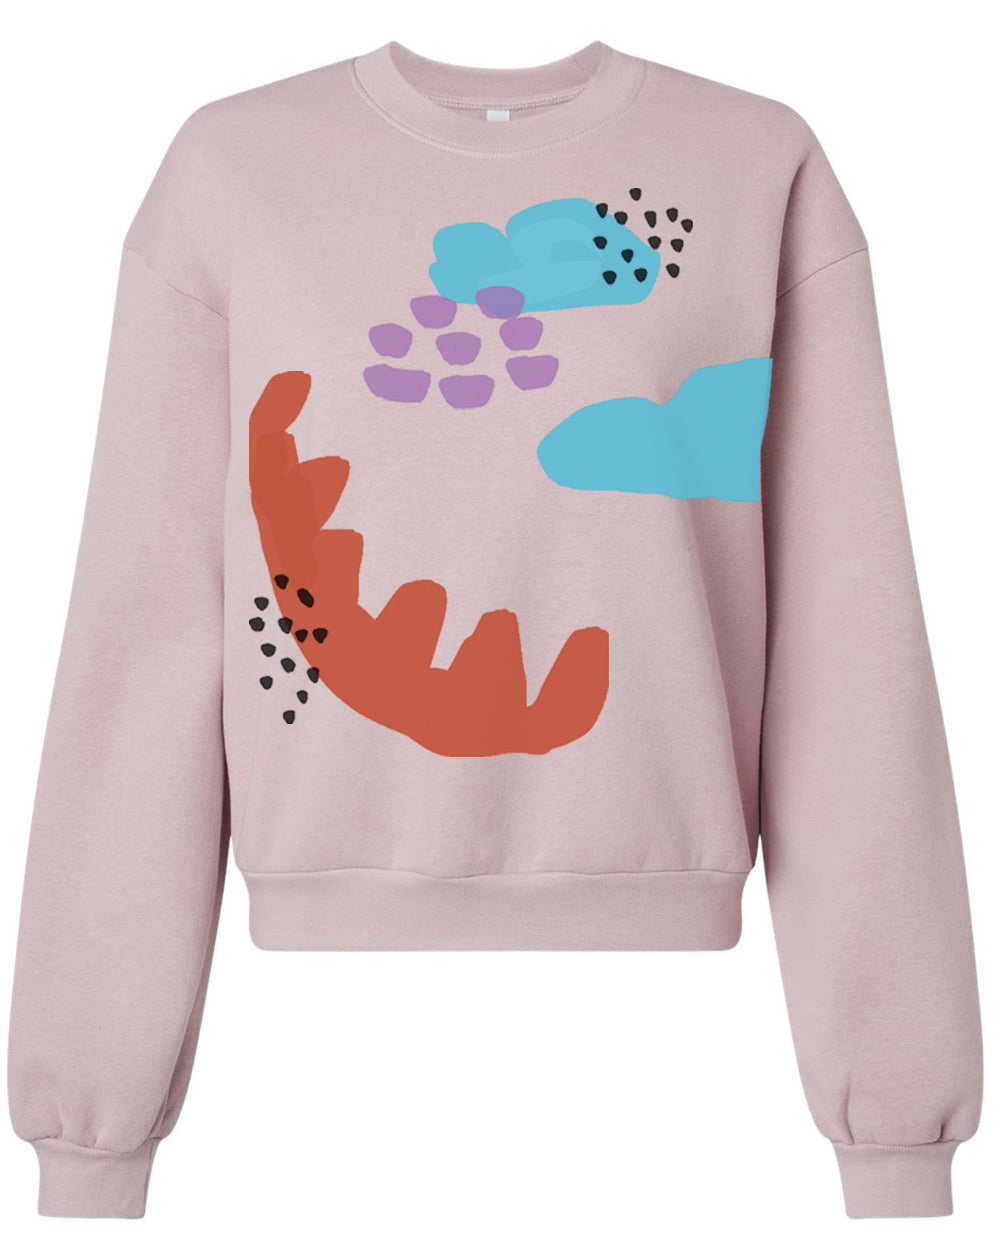 a pink sweatshirt with an image of a dinosaur on it